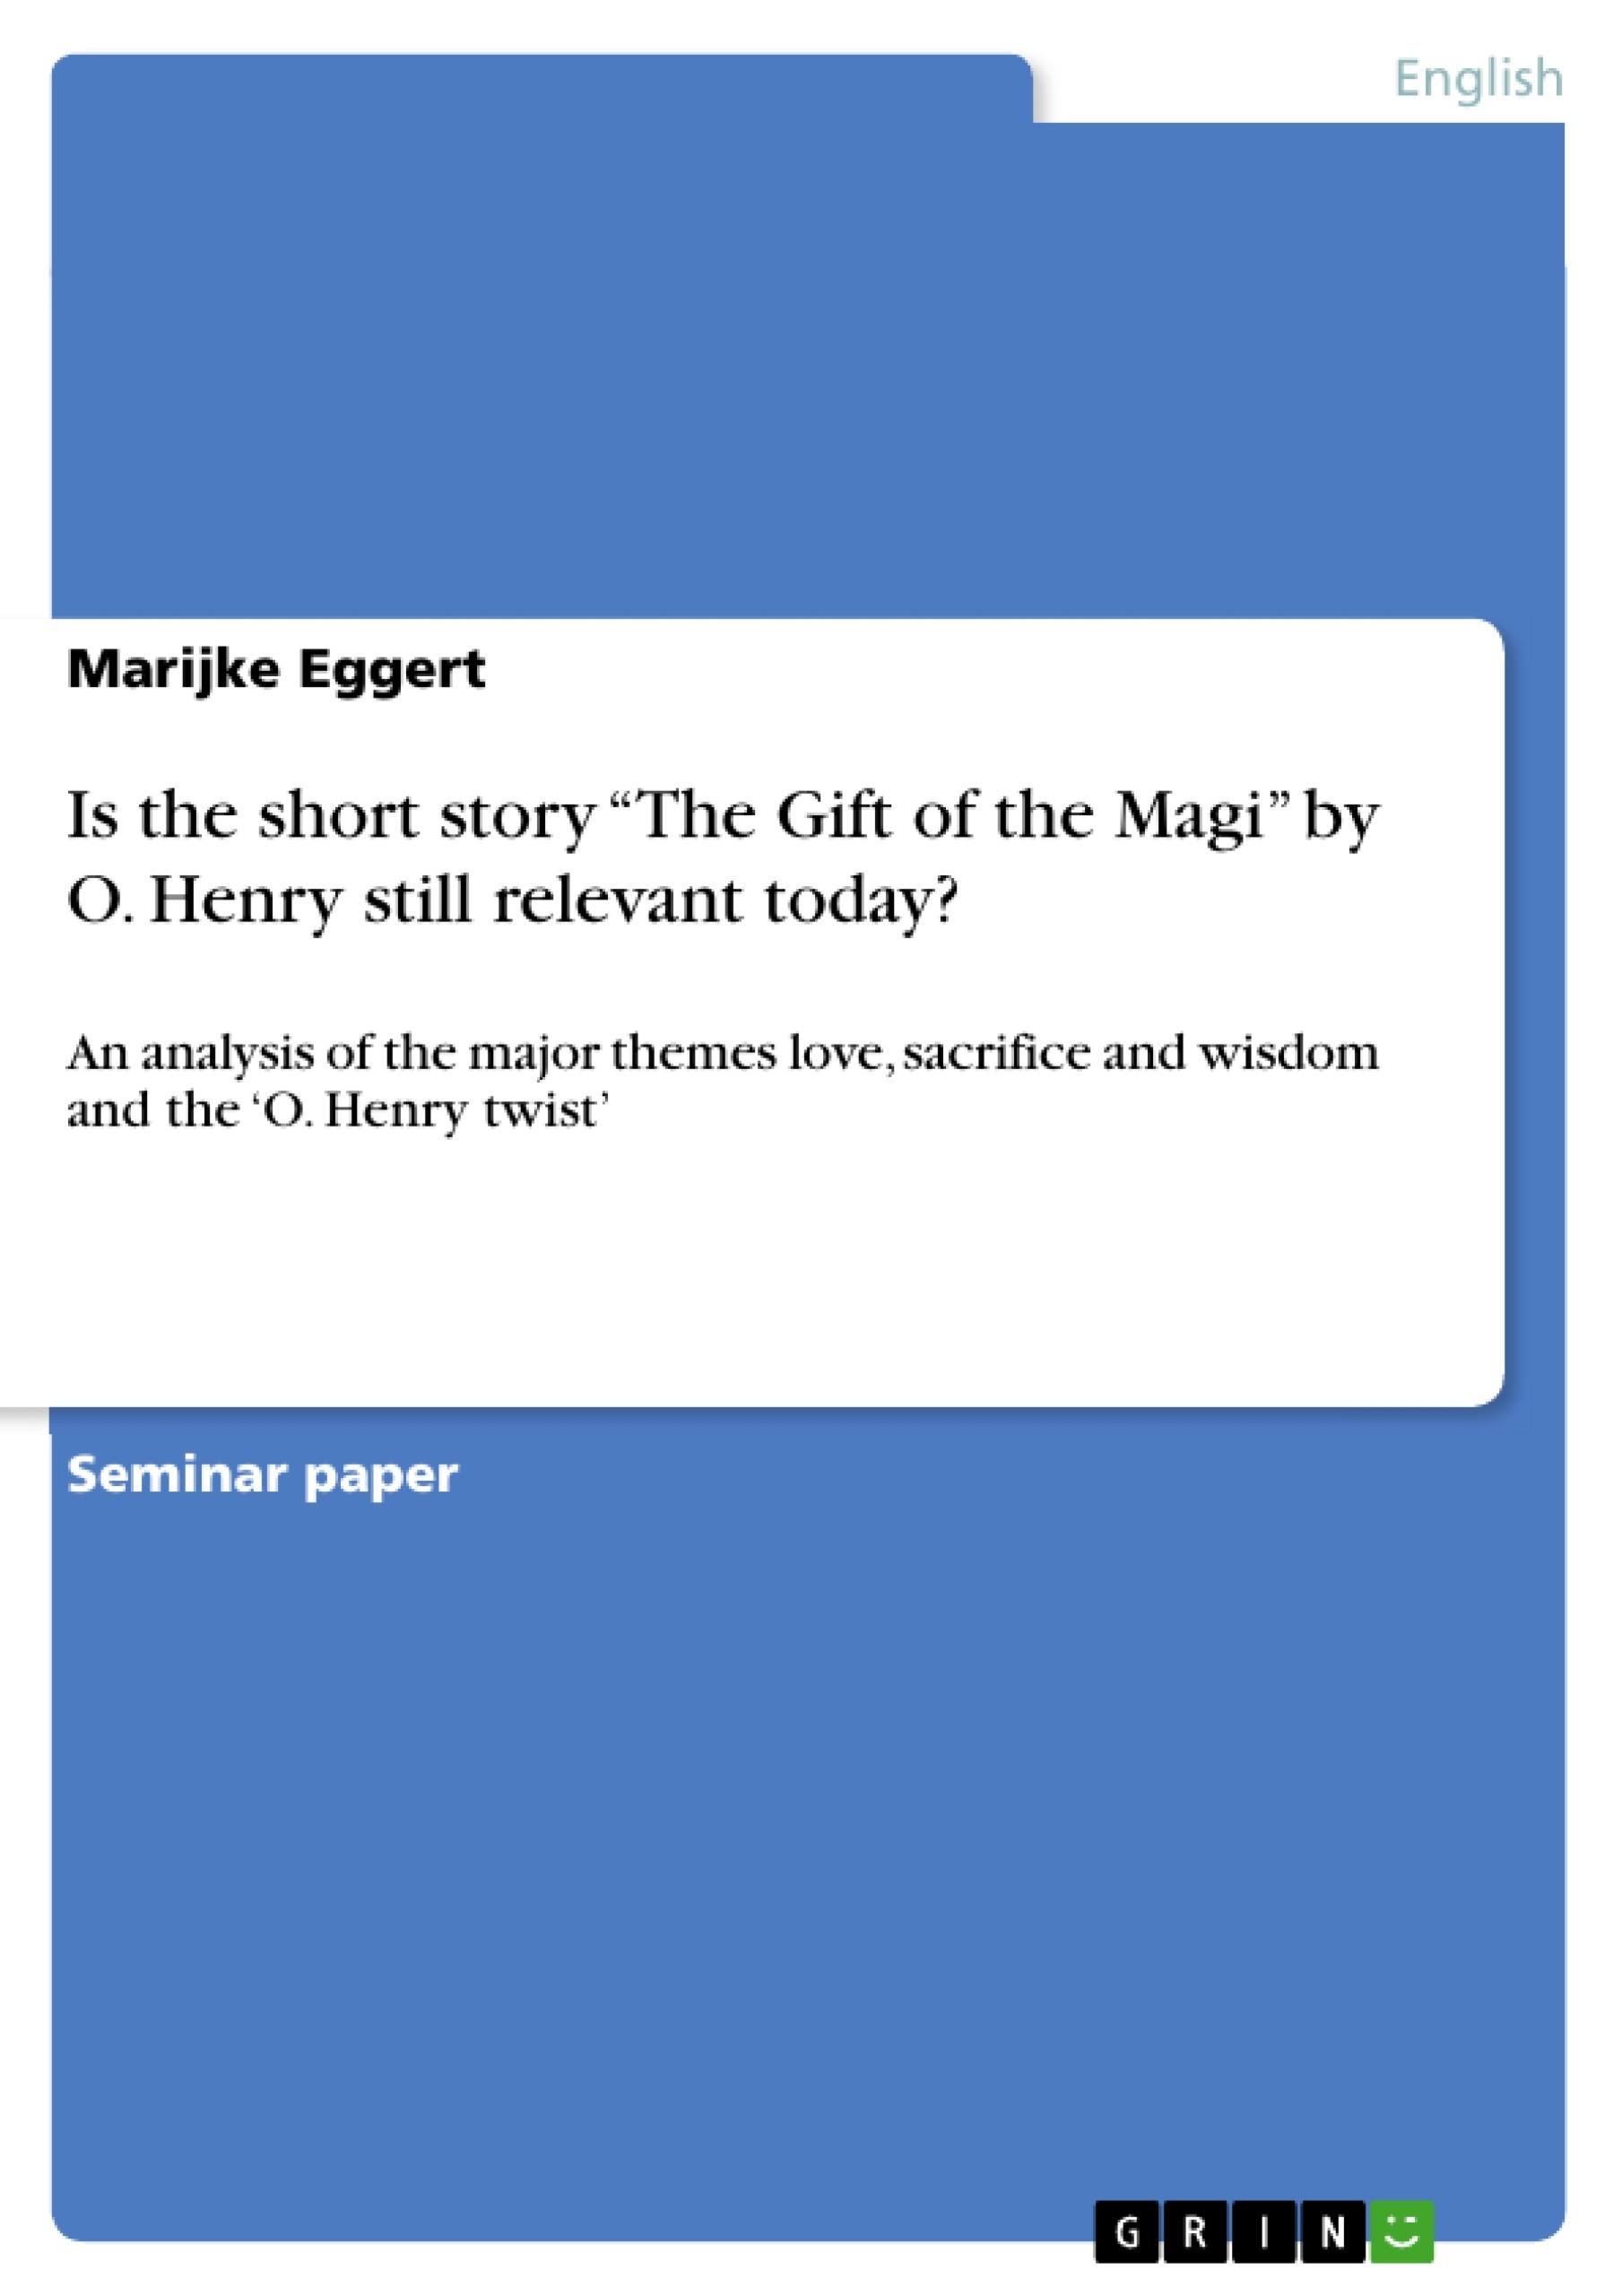 Titre: Is the short story “The Gift of the Magi” by O. Henry still relevant today?